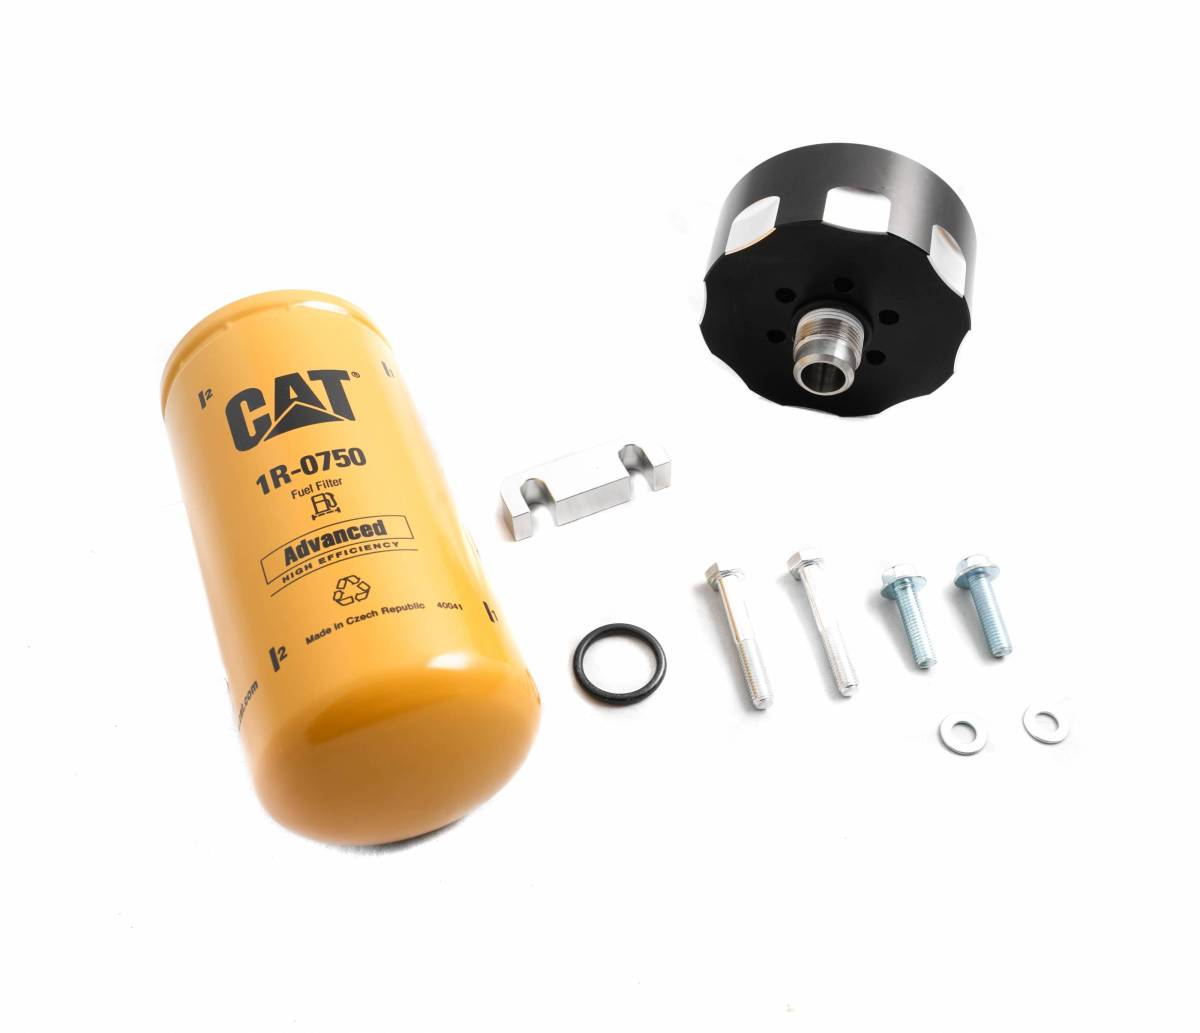 Rudy's CAT 1R0750 Fuel Filter Adapter For 0116 6.6 Duramax